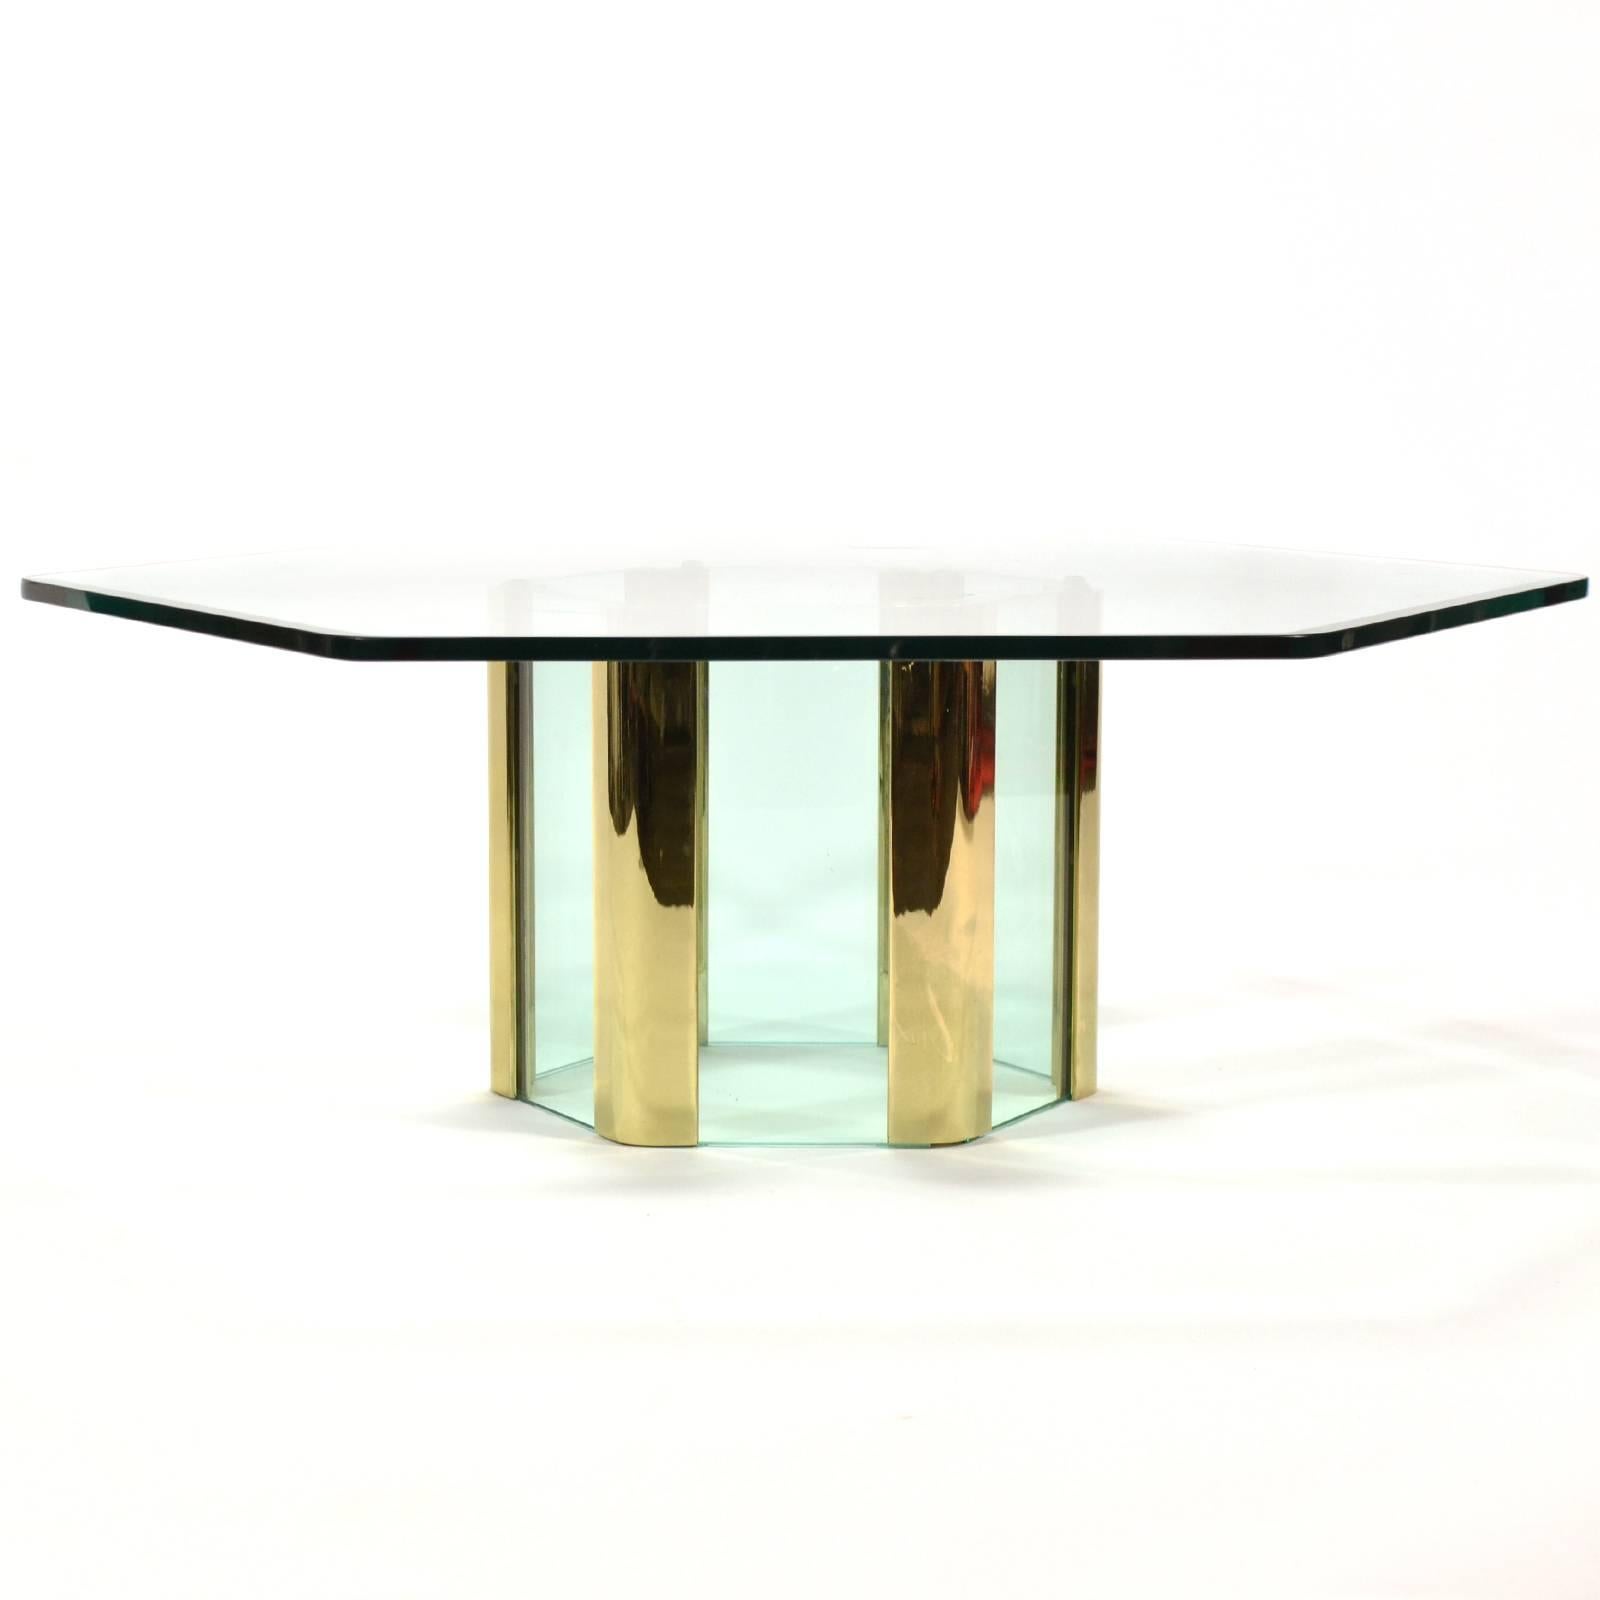 Hollywood Regency Pace Coffee Table with Hexagonal Designed by Leon Rosen